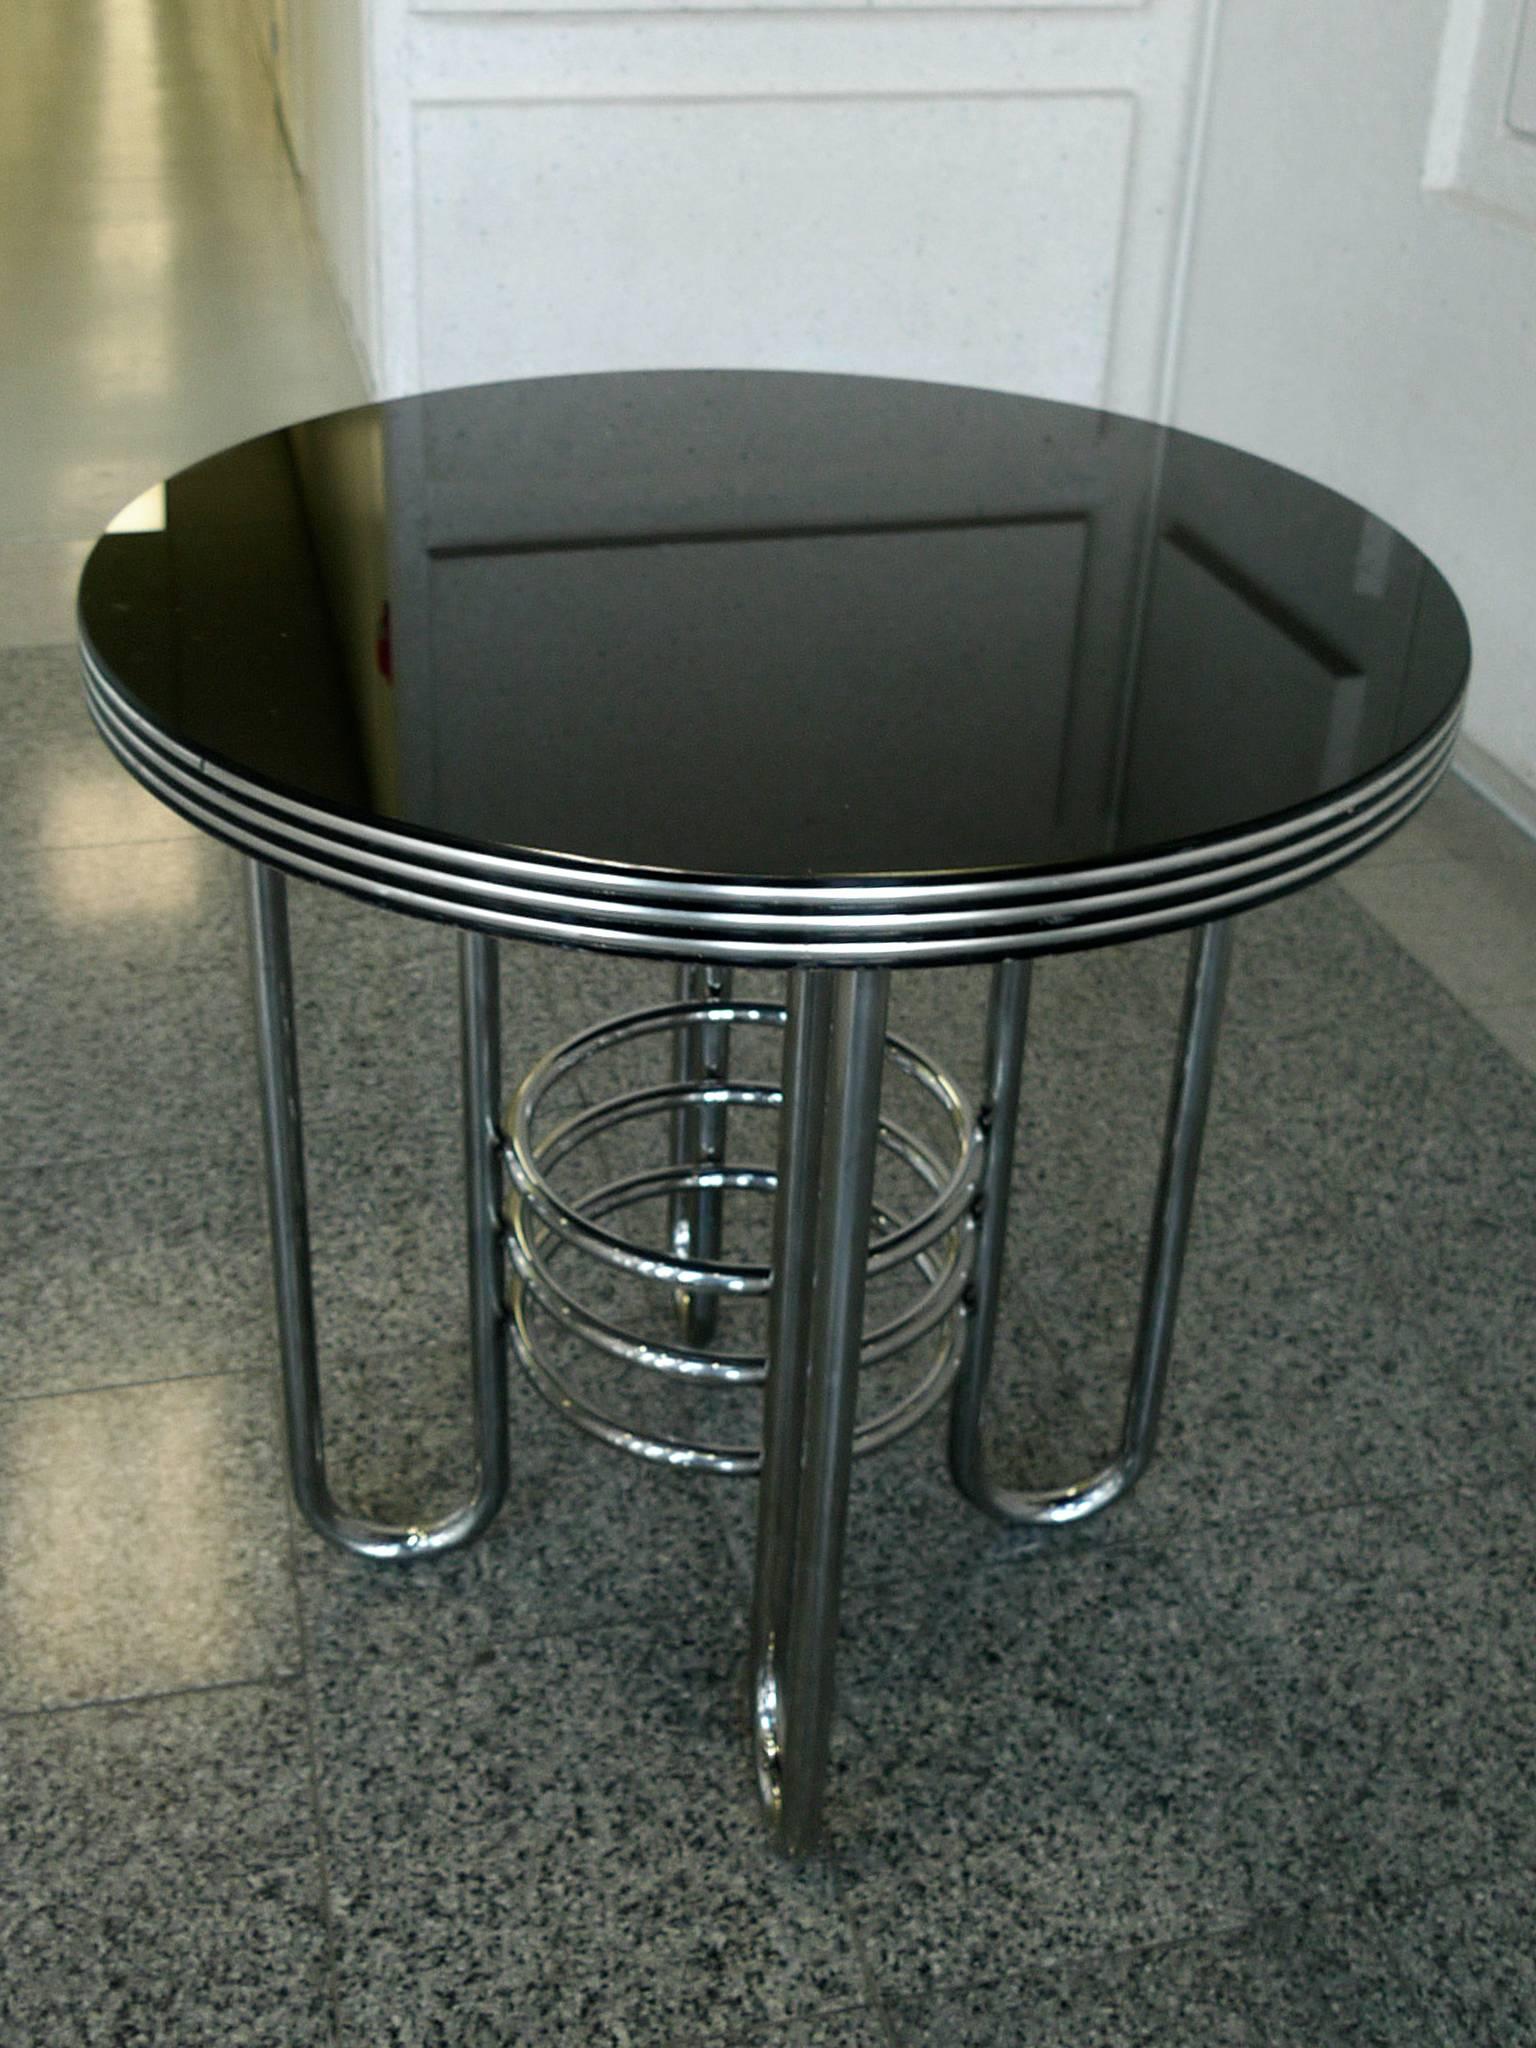 This round occasional table is in the Art Deco, Machine Age style. It's comprised of a tubular chrome frame and a black glass top. Like Gilbert Rohde's designs, the table distils the modern look of Industrial machines into a Minimalist, decorative